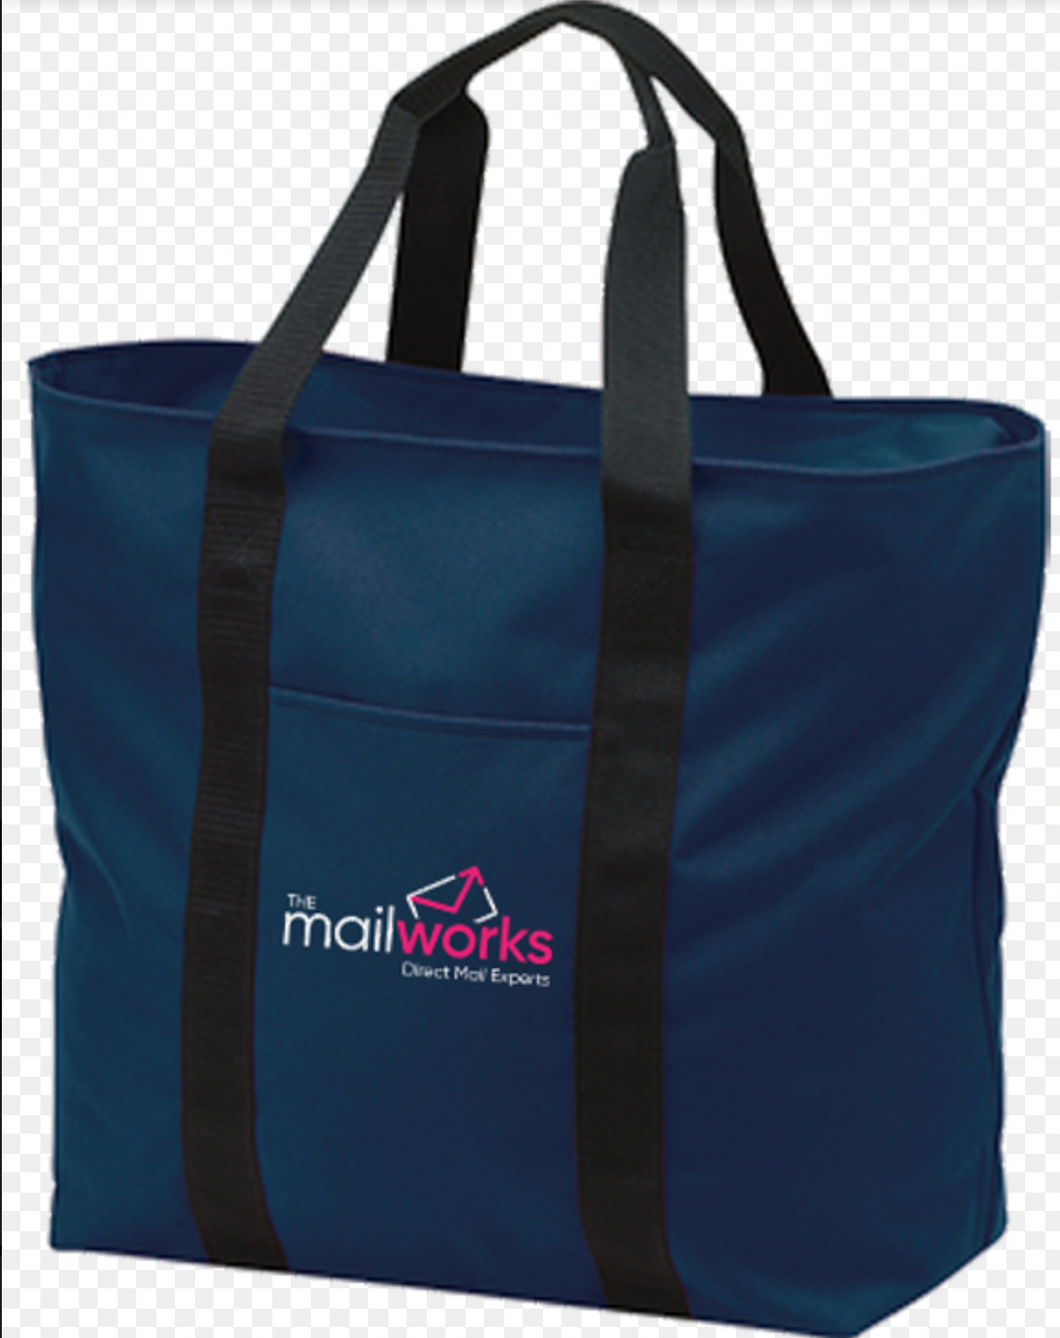 Mailworks Tote